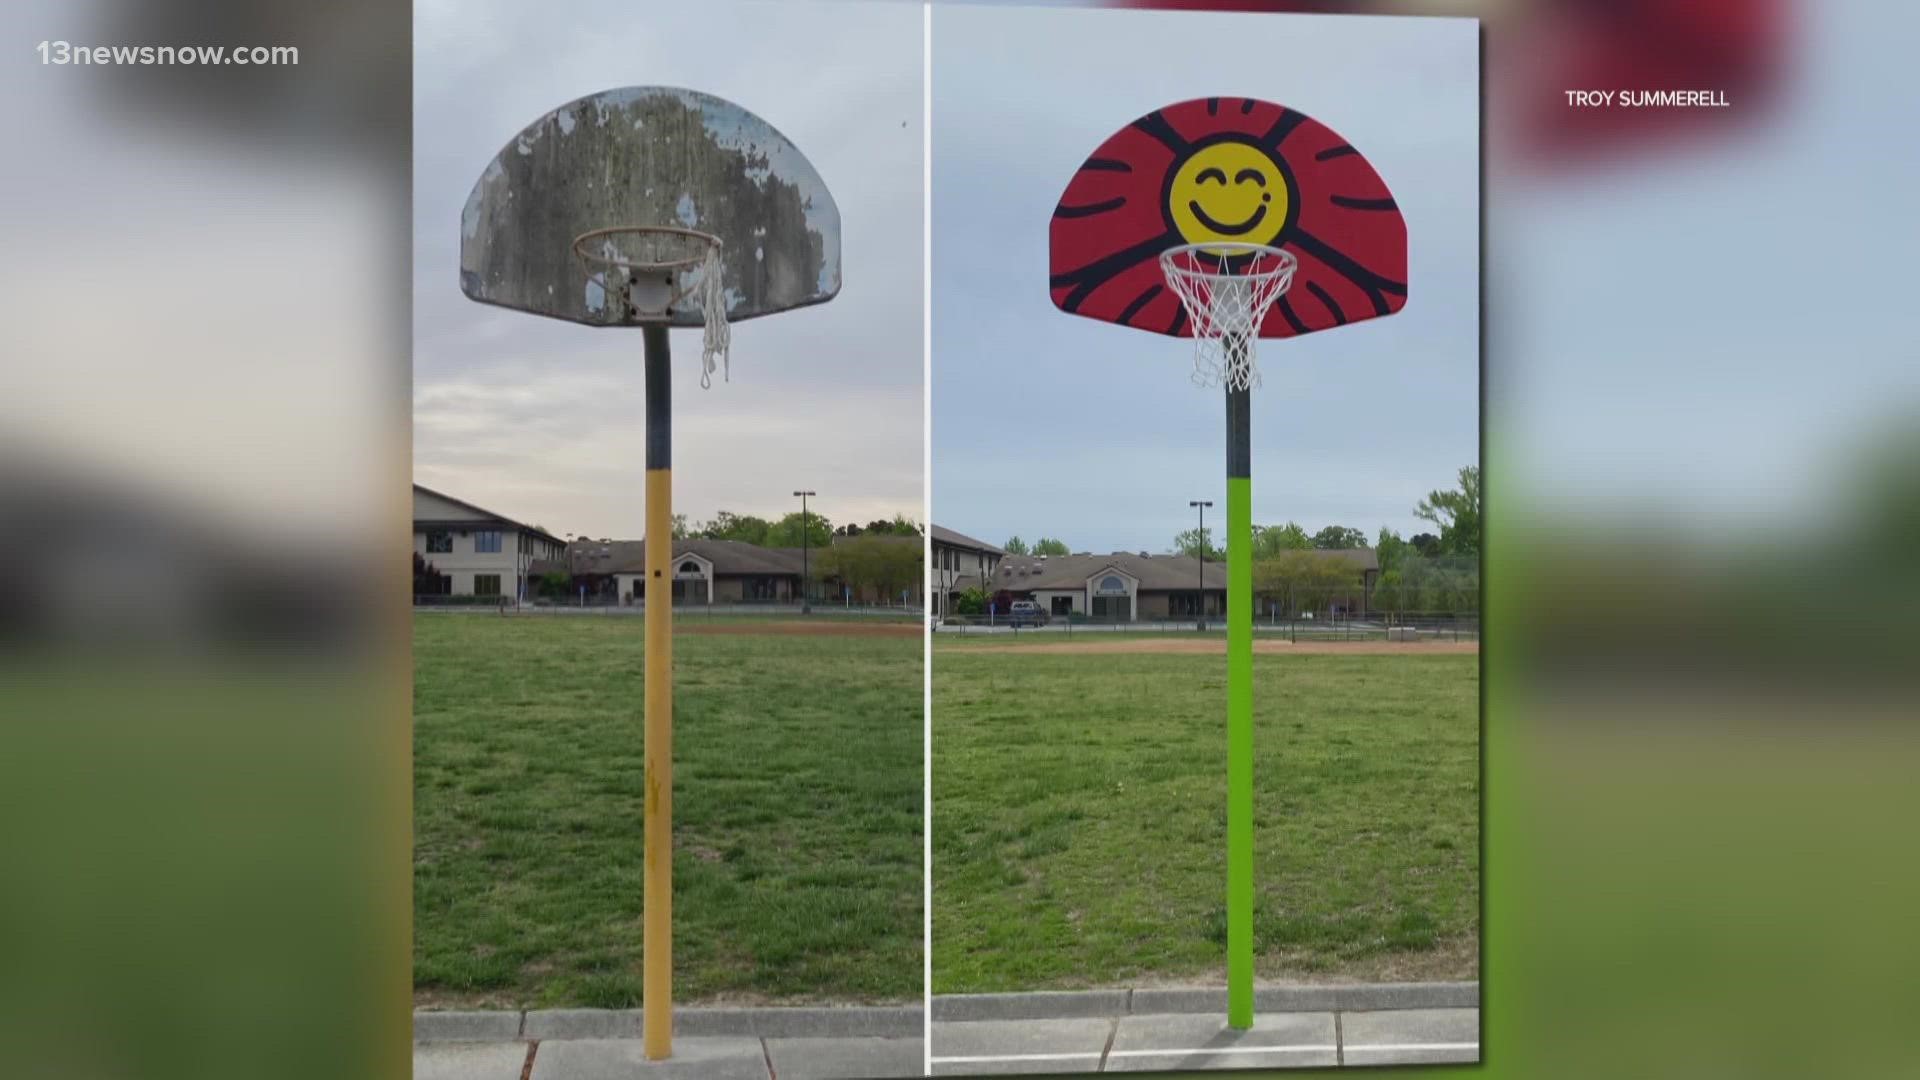 One man's passion project is sparking smiles at local schools and their surrounding neighborhoods.